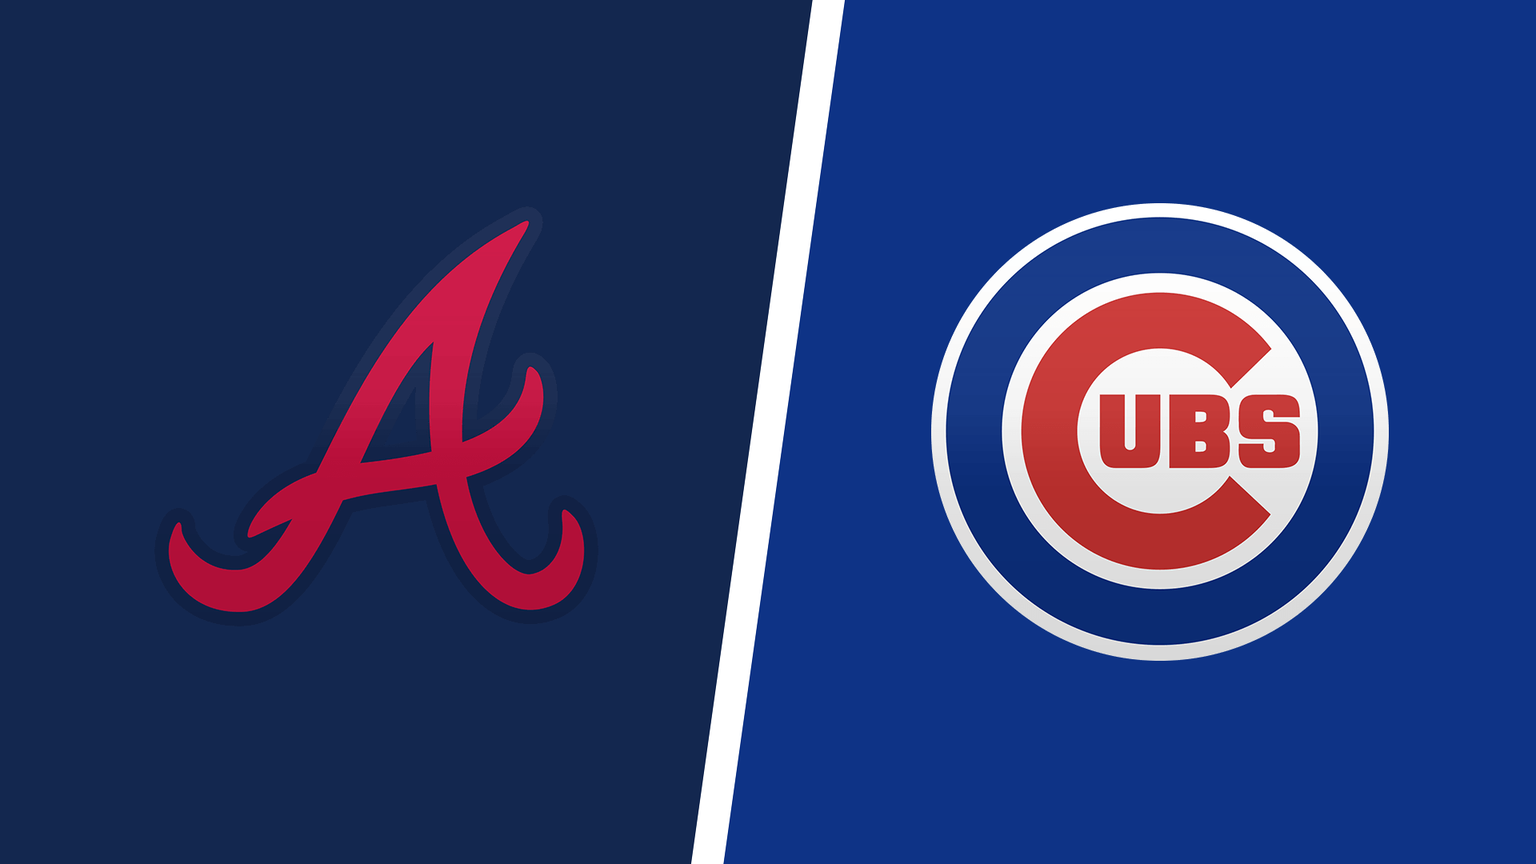 How to Watch Chicago Cubs vs. Atlanta Braves Live Online on April 26